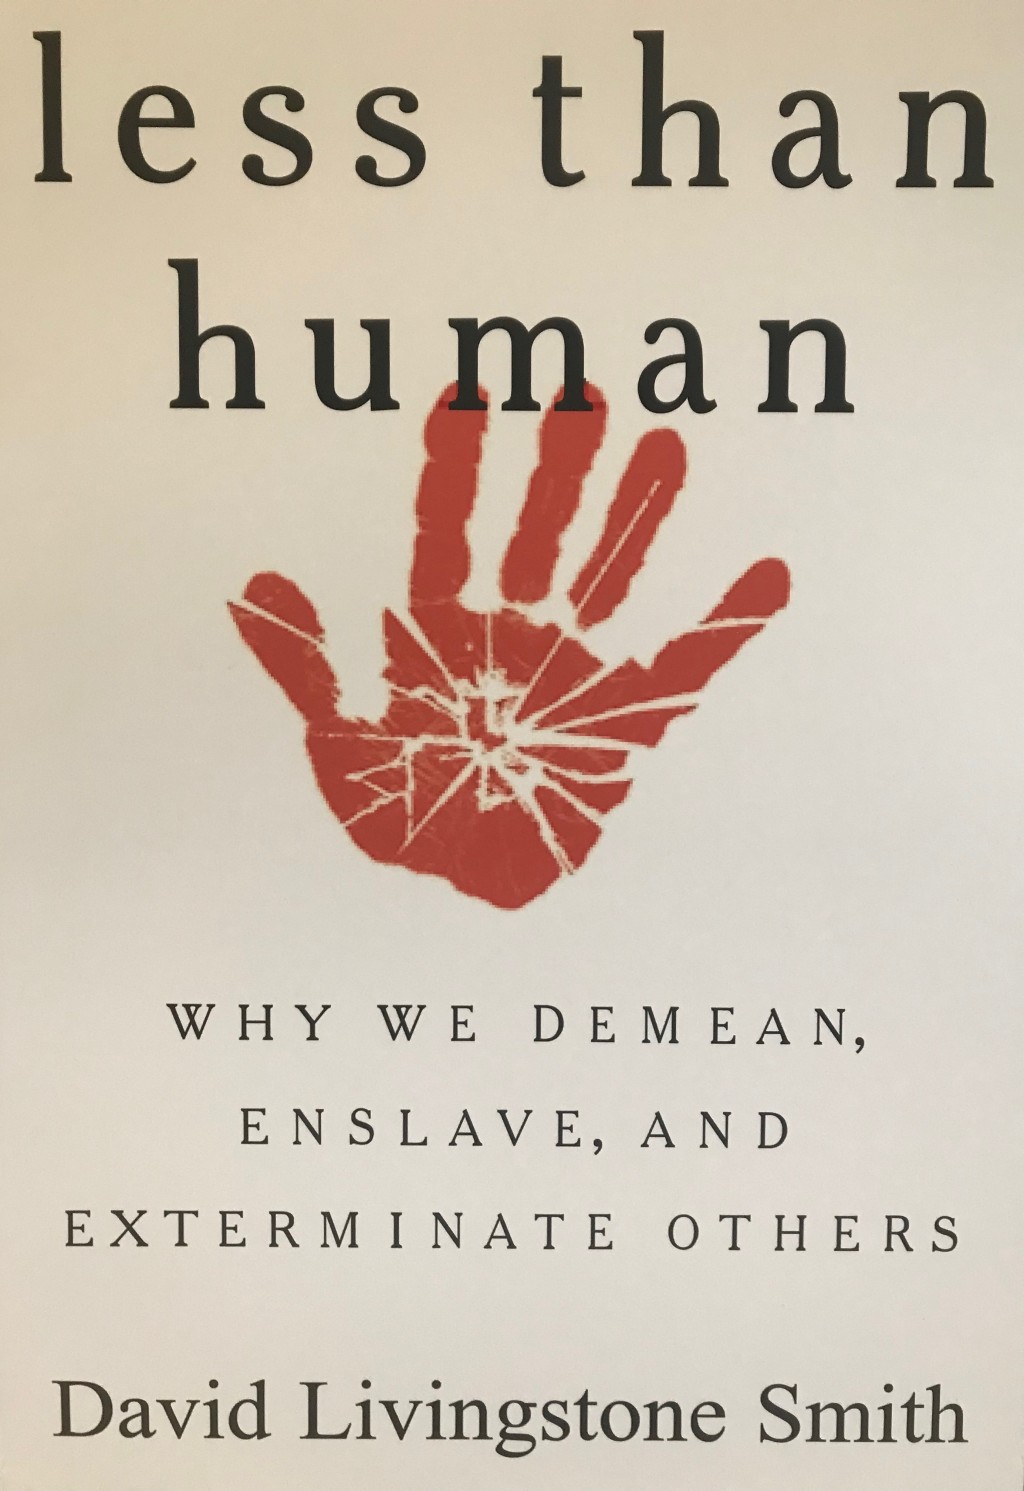 Smith's book "Less than Human" explores why people dehumanize others